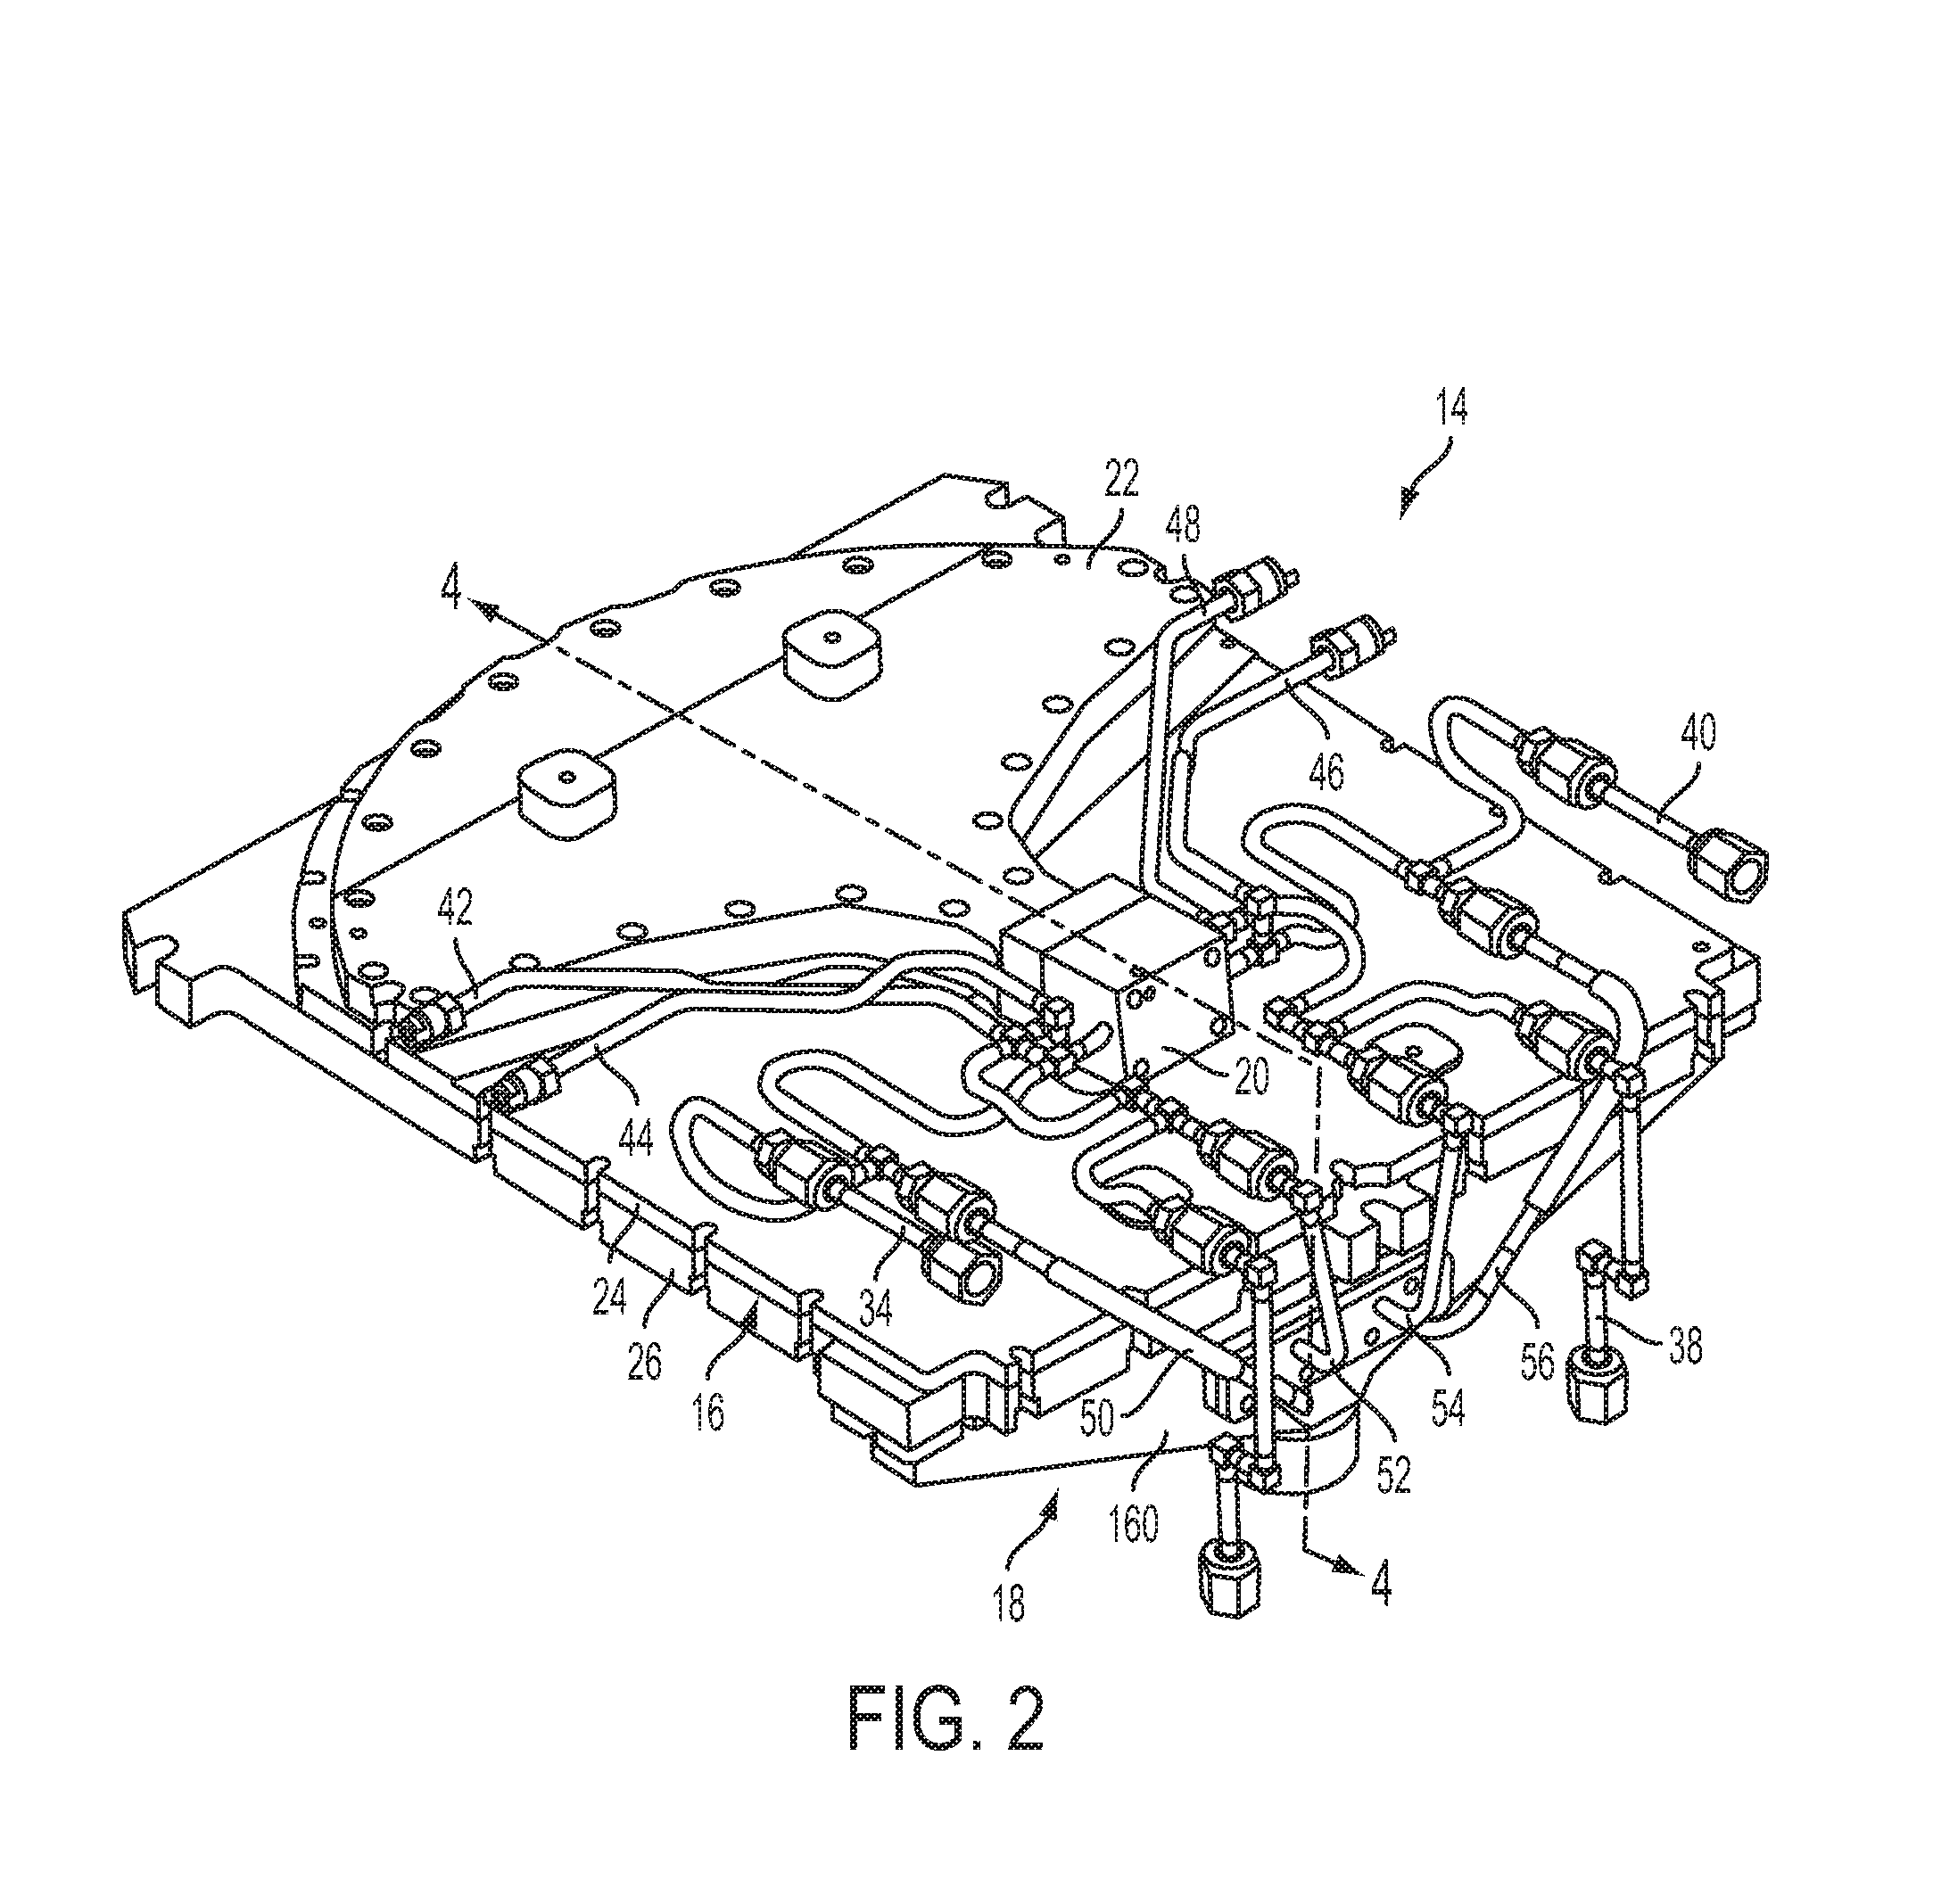 Semiconductor processing reactor and components thereof